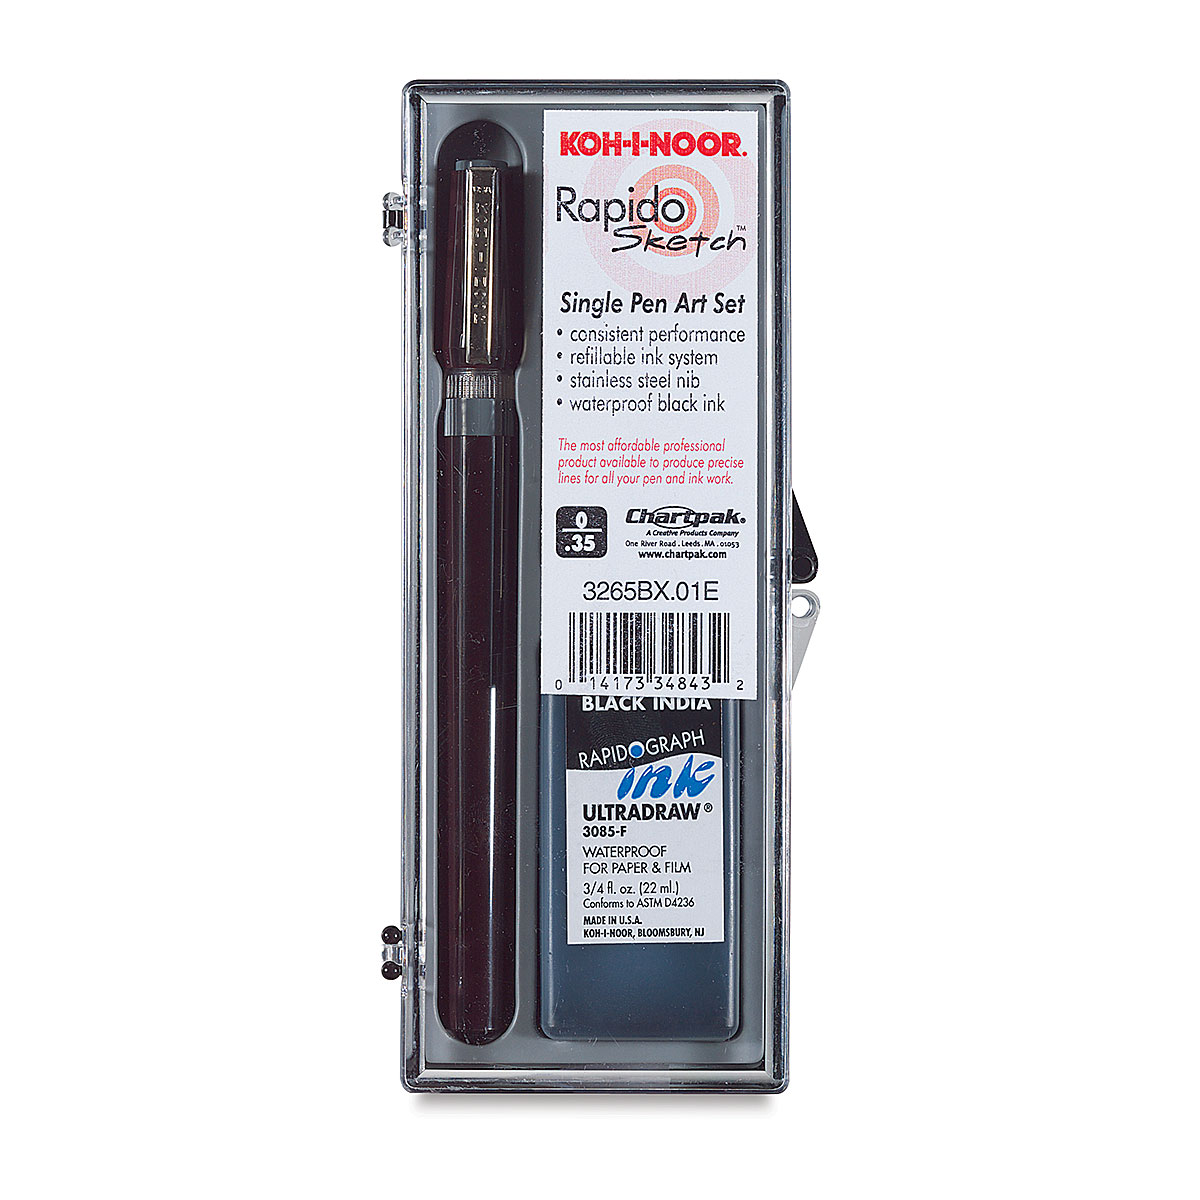 Koh-I-Noor Rapidograph Pen and Ink Set, 25mm Pen Nib and .75 oz. Bottle of  Ultradraw Black Ink, 1 Set Each (3165BX.ZZZ)